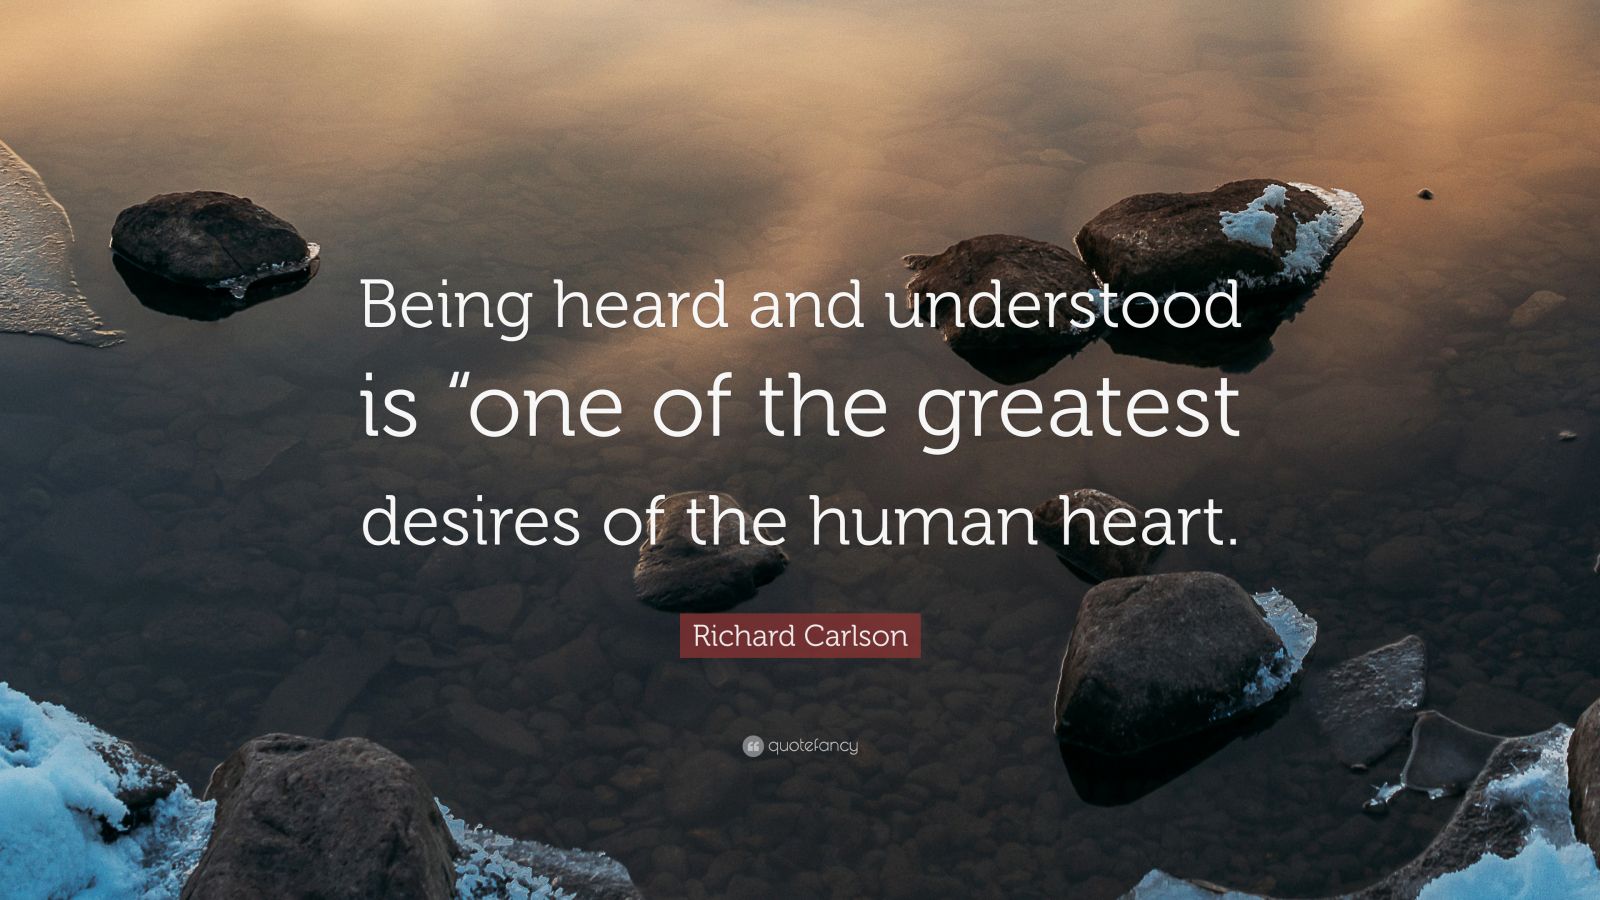 Richard Carlson Quote: “Being heard and understood is “one of the